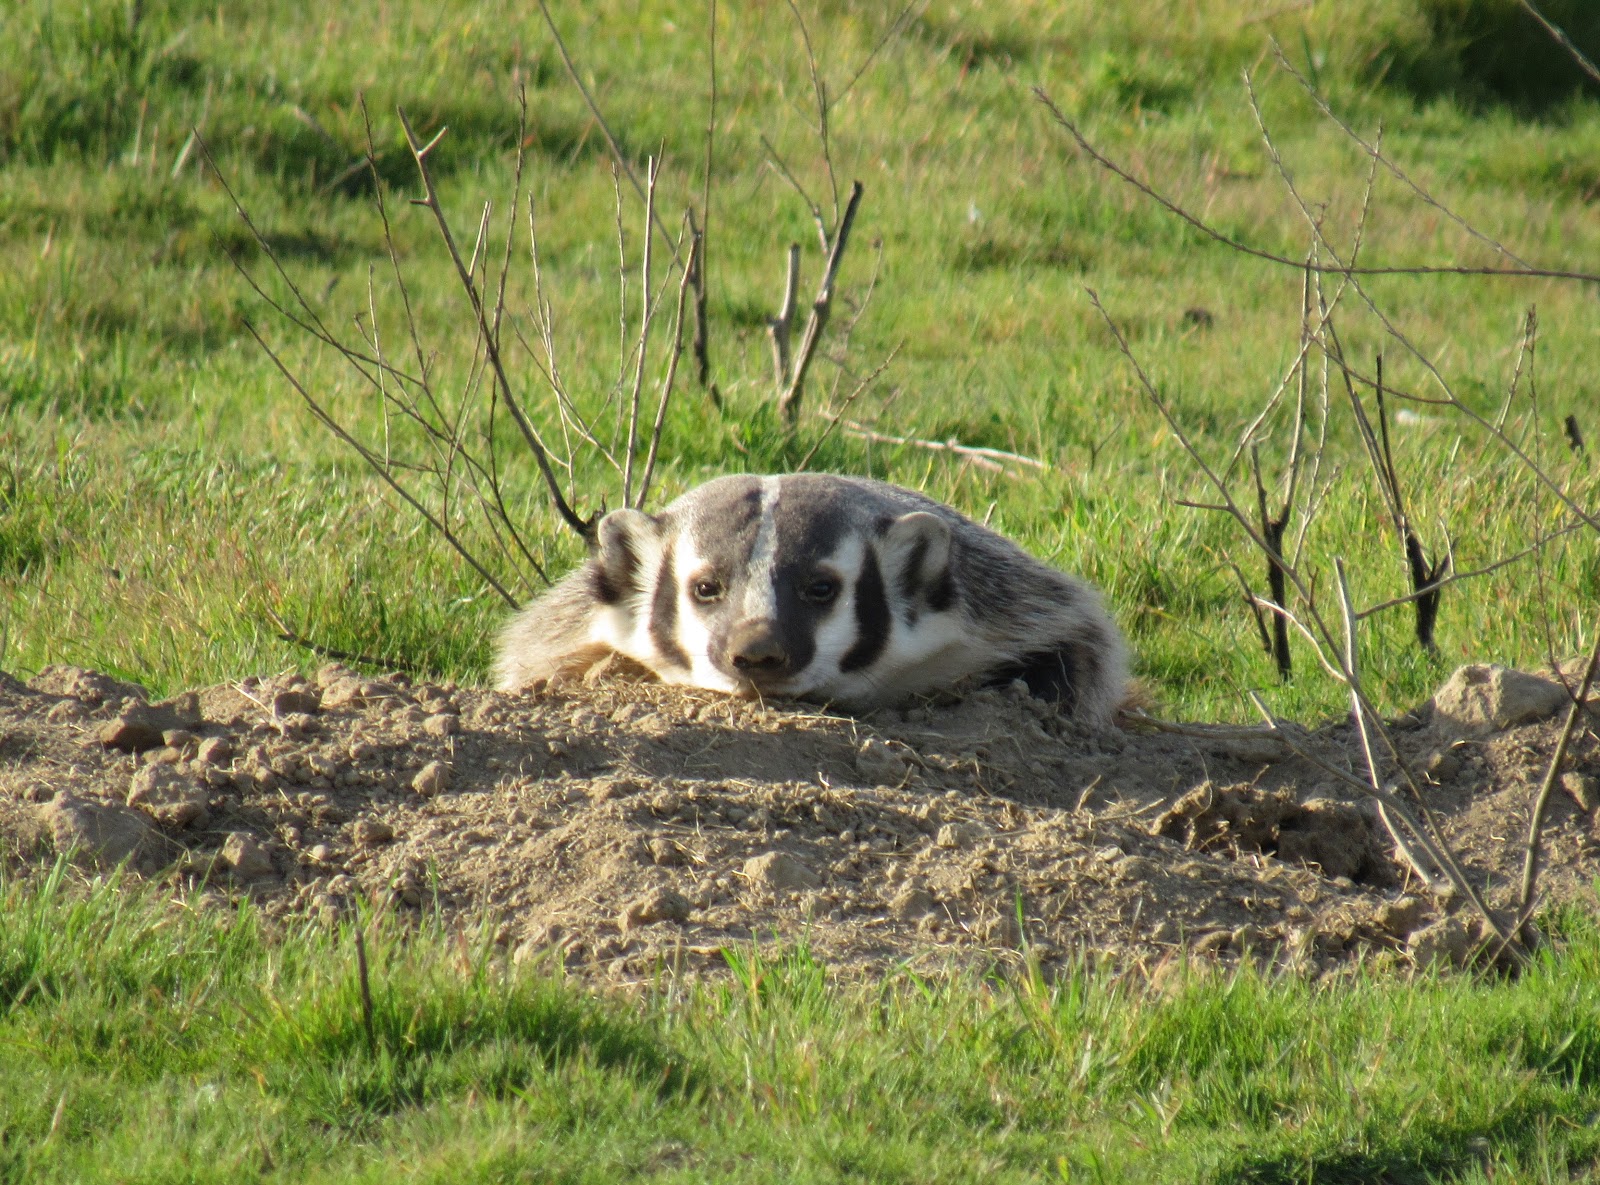 The American Badger: A Lesson In Respect